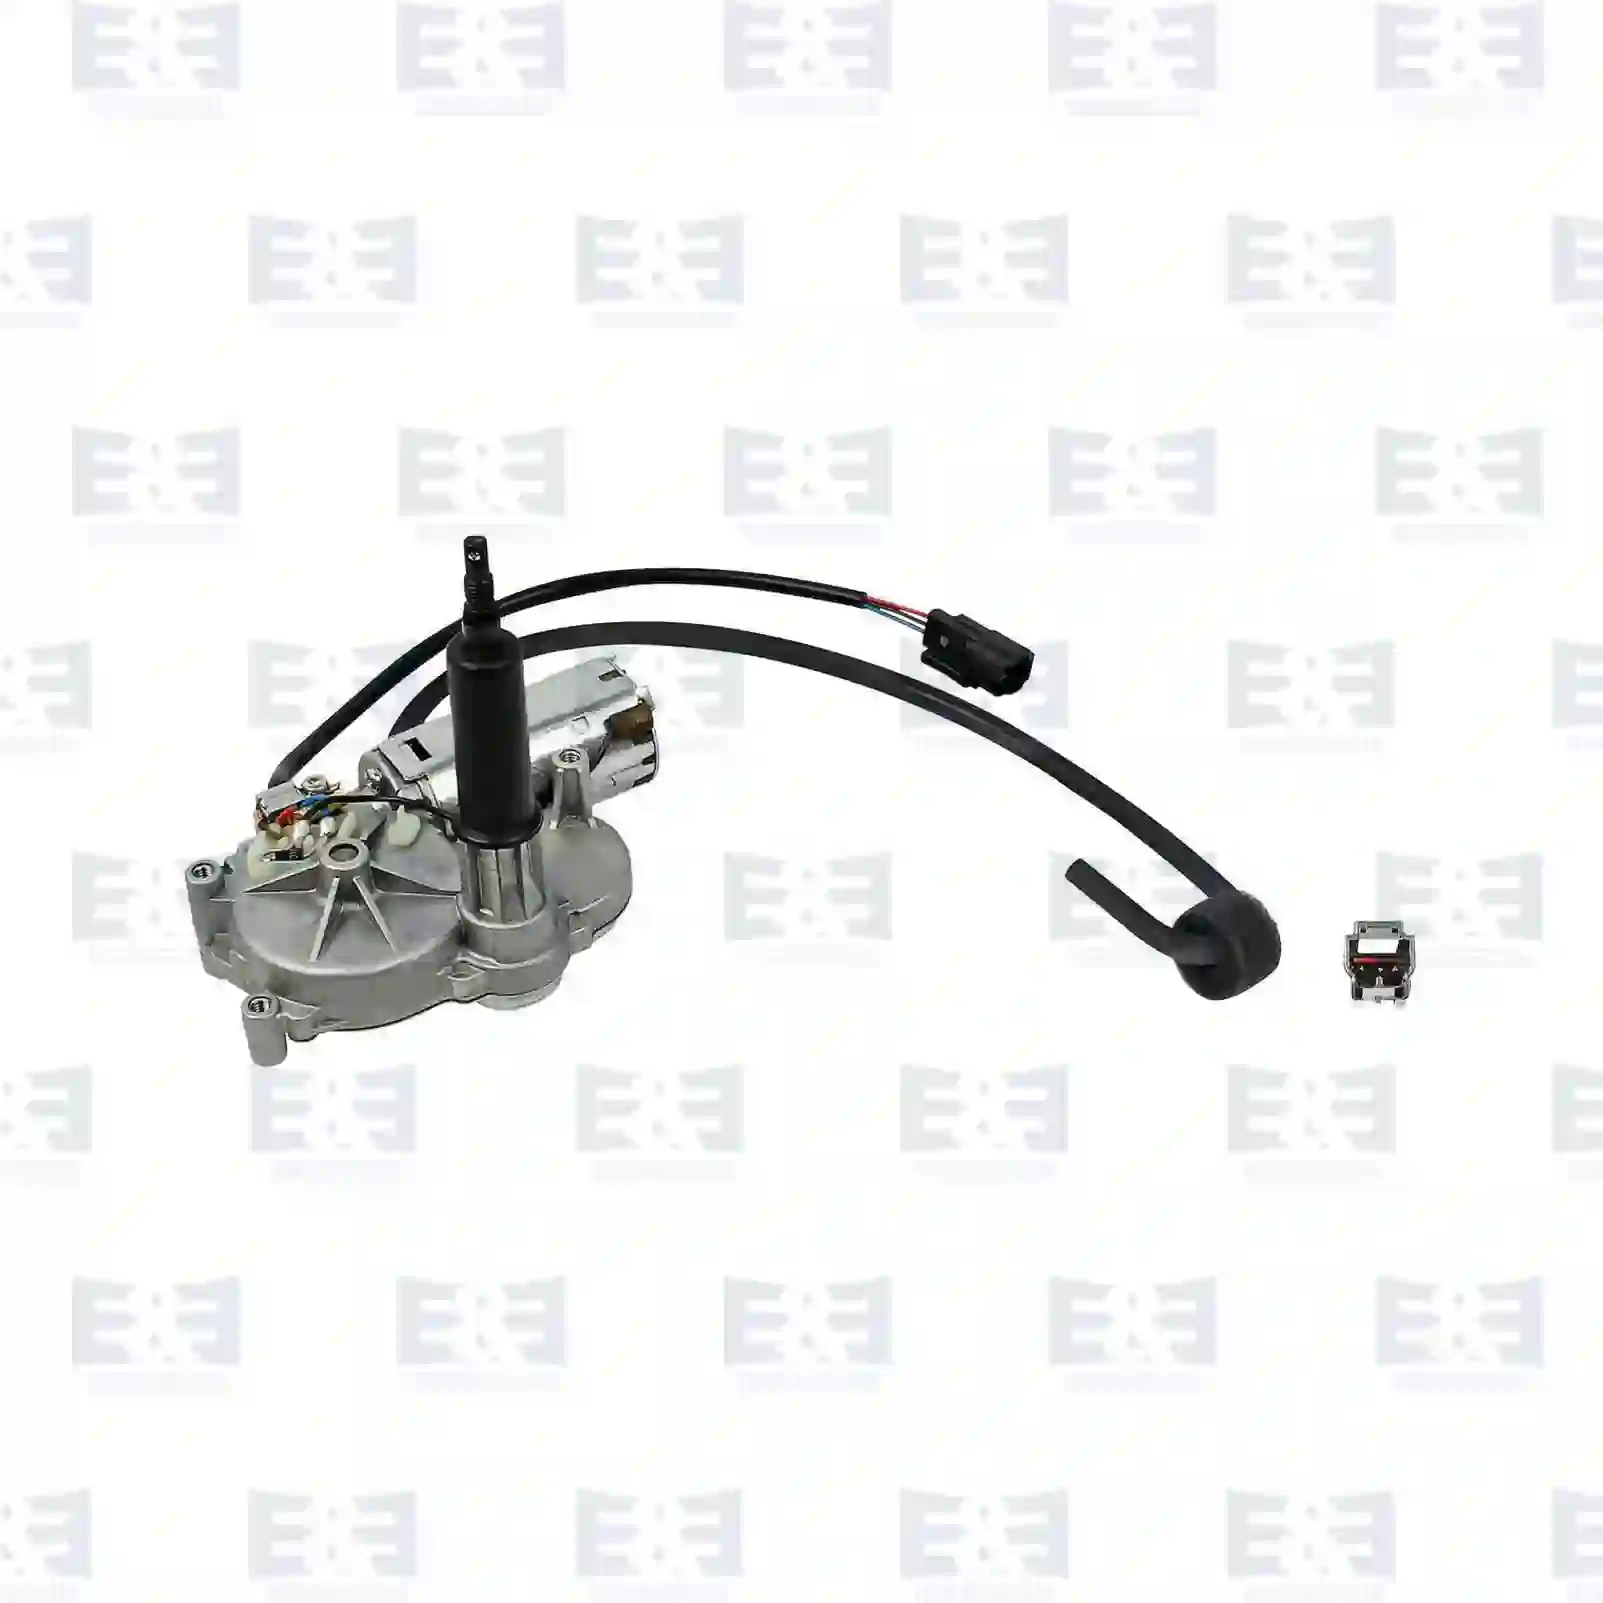 Wiper motor, left, 2E2292560, 1493158, 1546169, 4618813, YC15-17W400-CG, YC15-17W400-CH, YC15-17W400-CJ ||  2E2292560 E&E Truck Spare Parts | Truck Spare Parts, Auotomotive Spare Parts Wiper motor, left, 2E2292560, 1493158, 1546169, 4618813, YC15-17W400-CG, YC15-17W400-CH, YC15-17W400-CJ ||  2E2292560 E&E Truck Spare Parts | Truck Spare Parts, Auotomotive Spare Parts